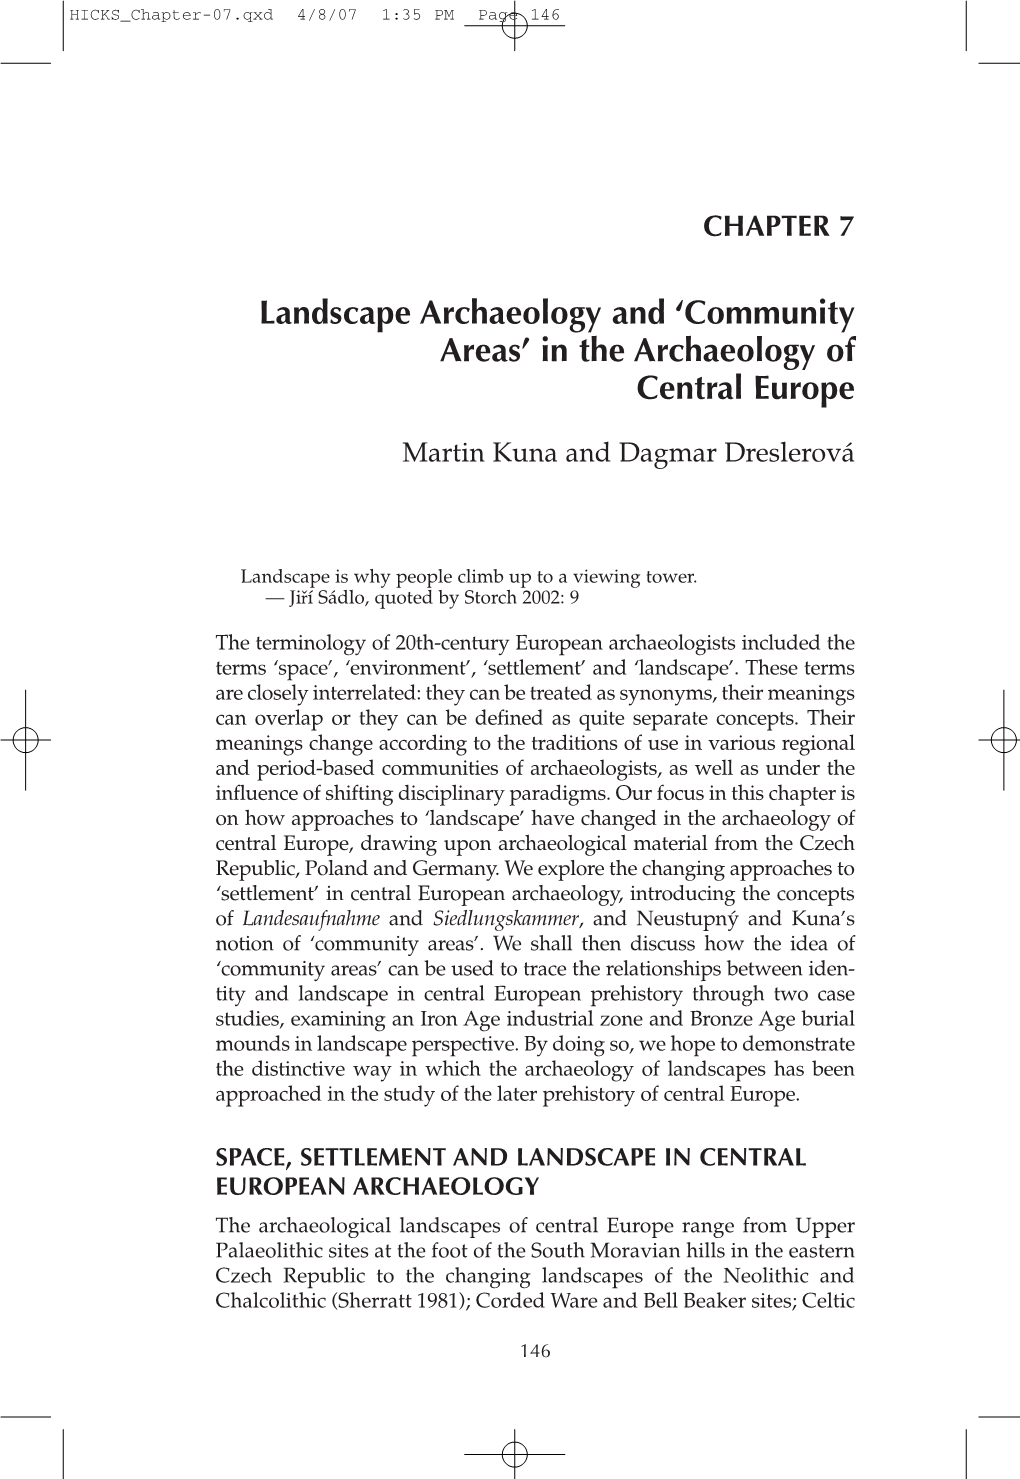 'Community Areas' in the Archaeology of Central Europe